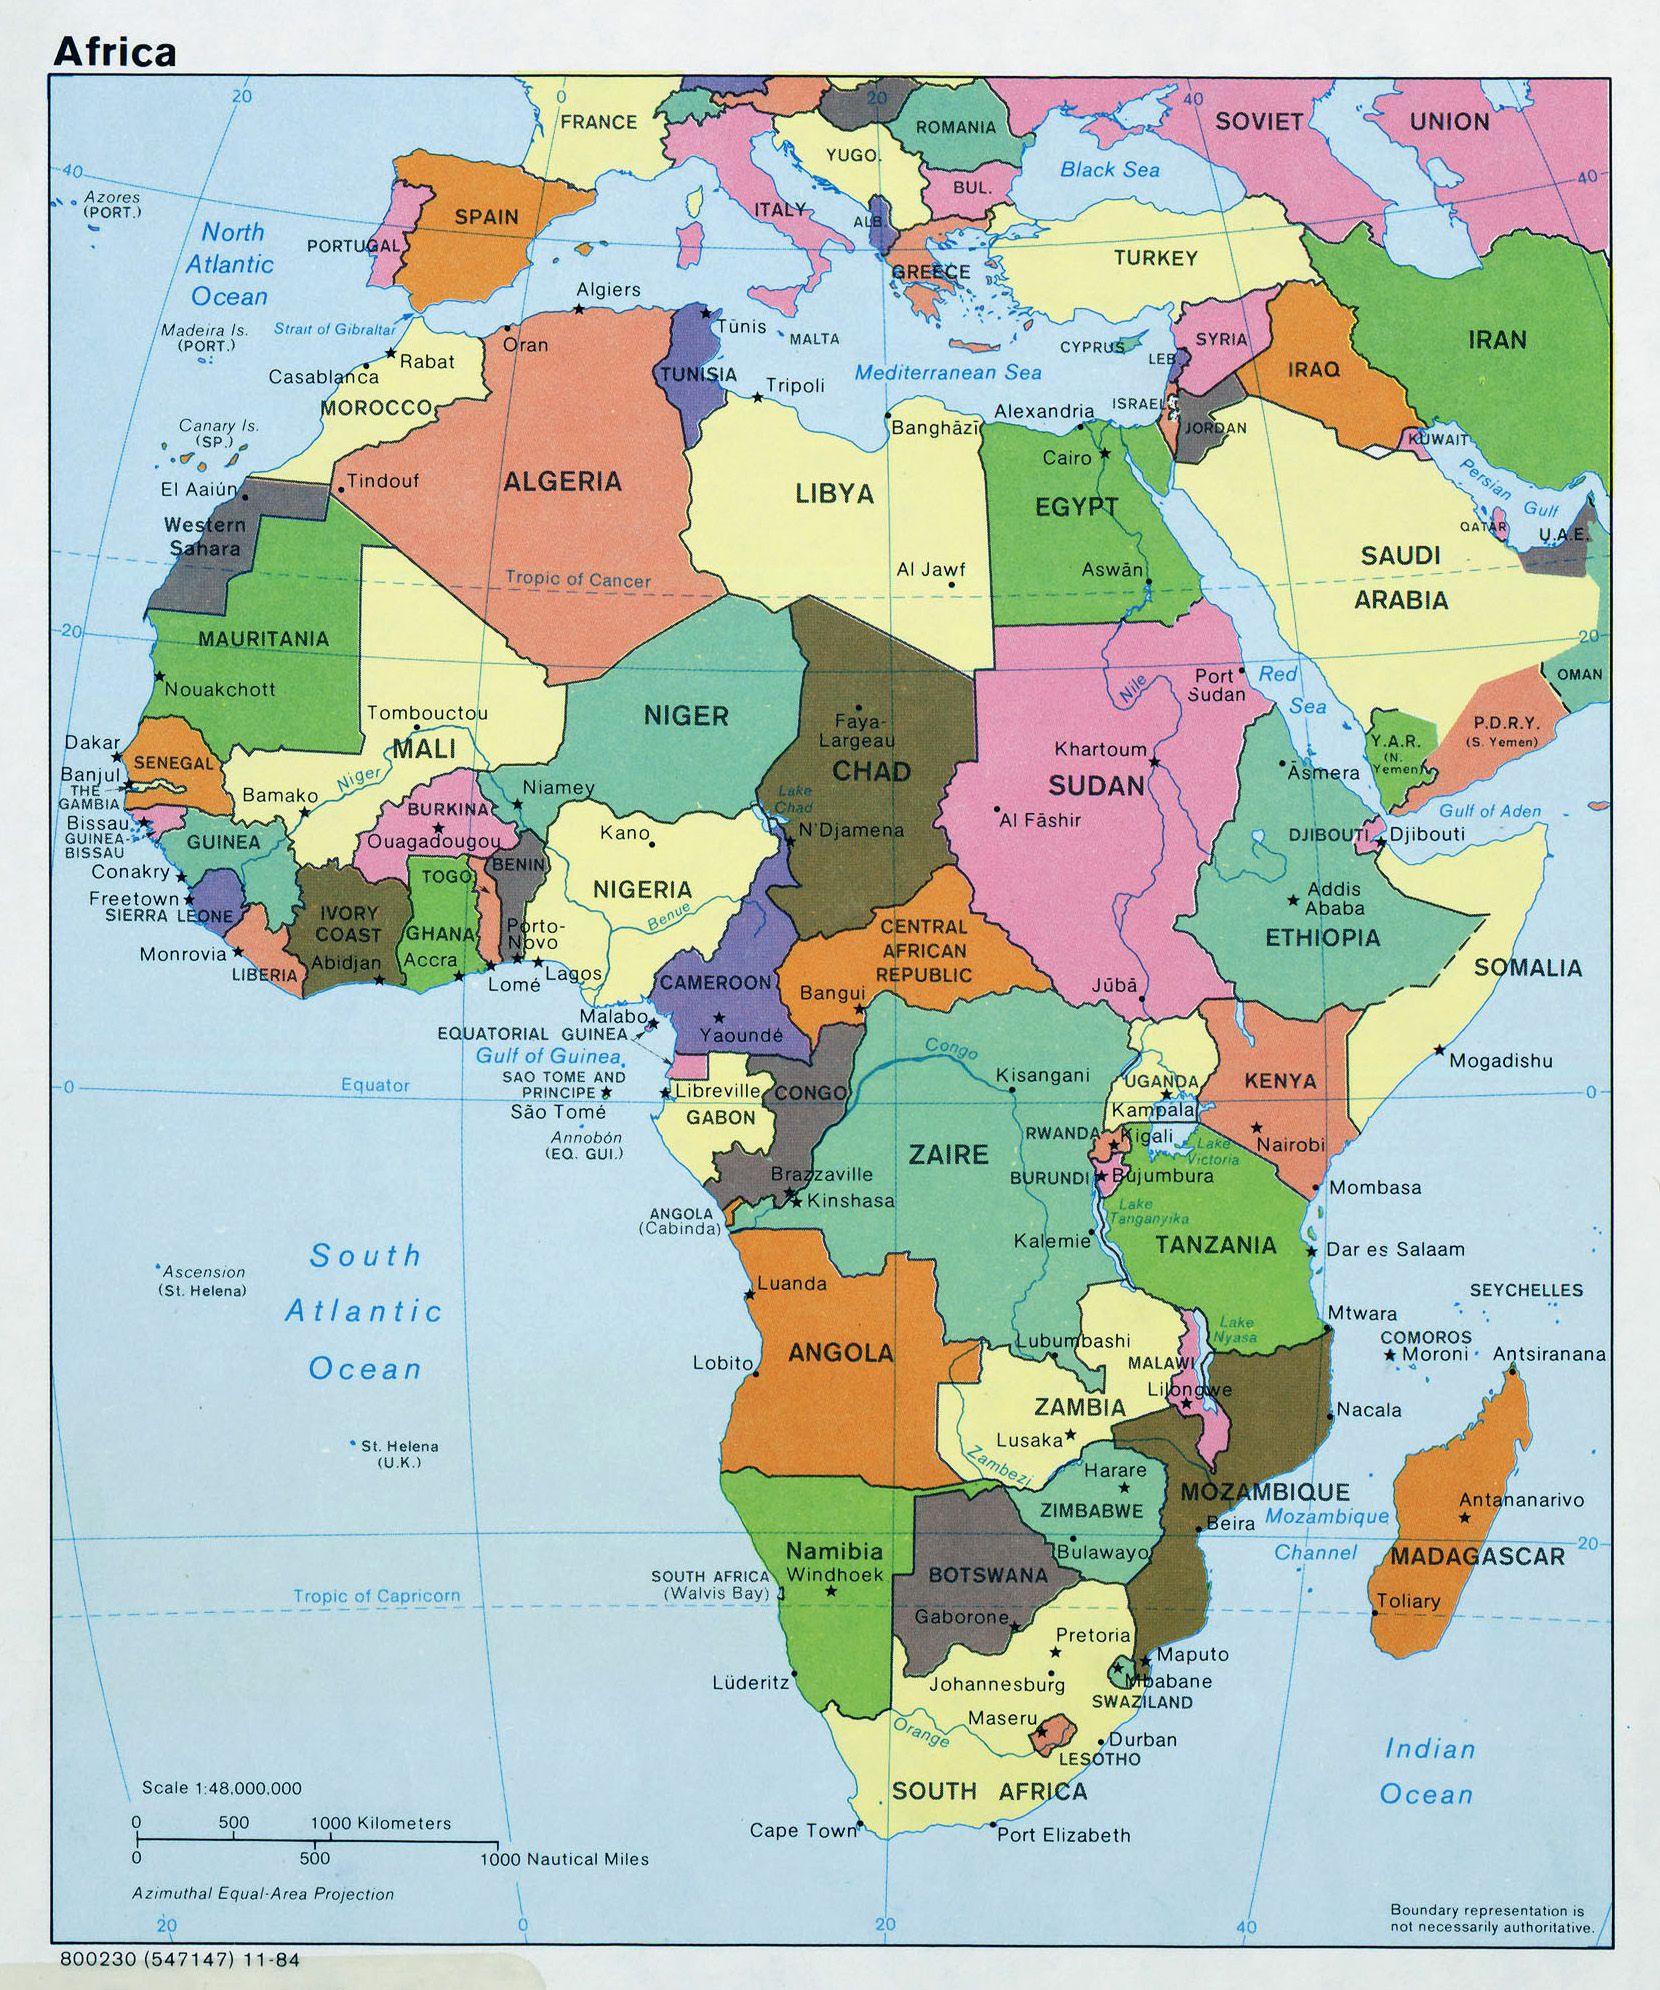 Maps Of Africa And African Countries Political Maps